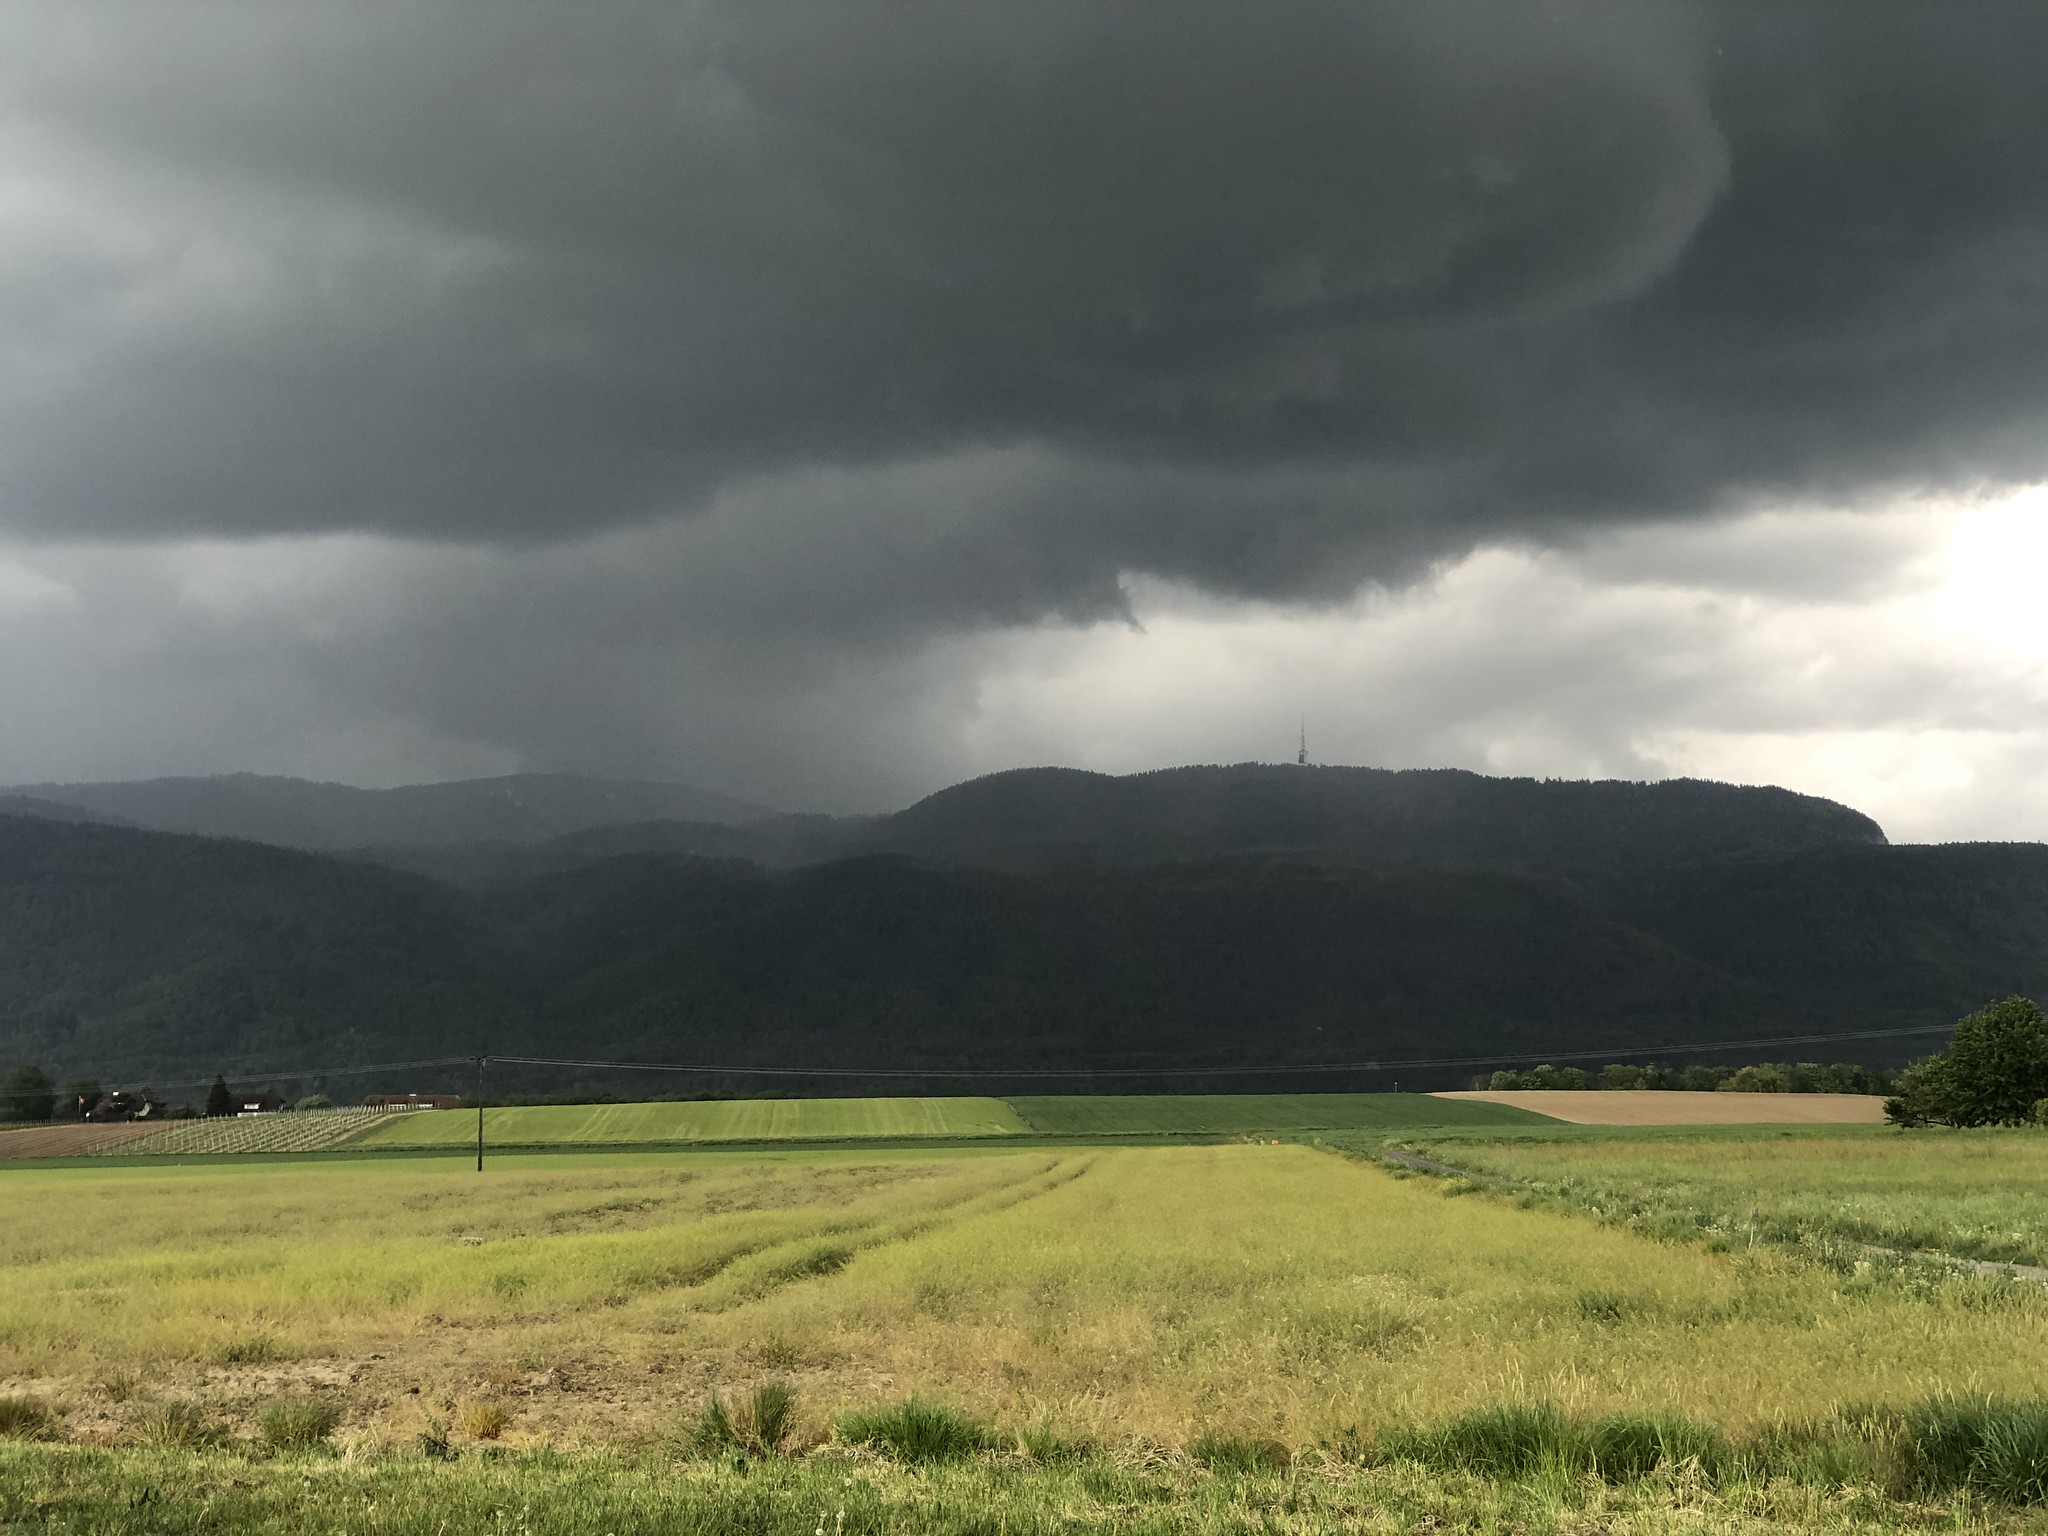 Day 43 of Self-Isolation in Switzerland – Caught Outdoors During a Thunderstorm